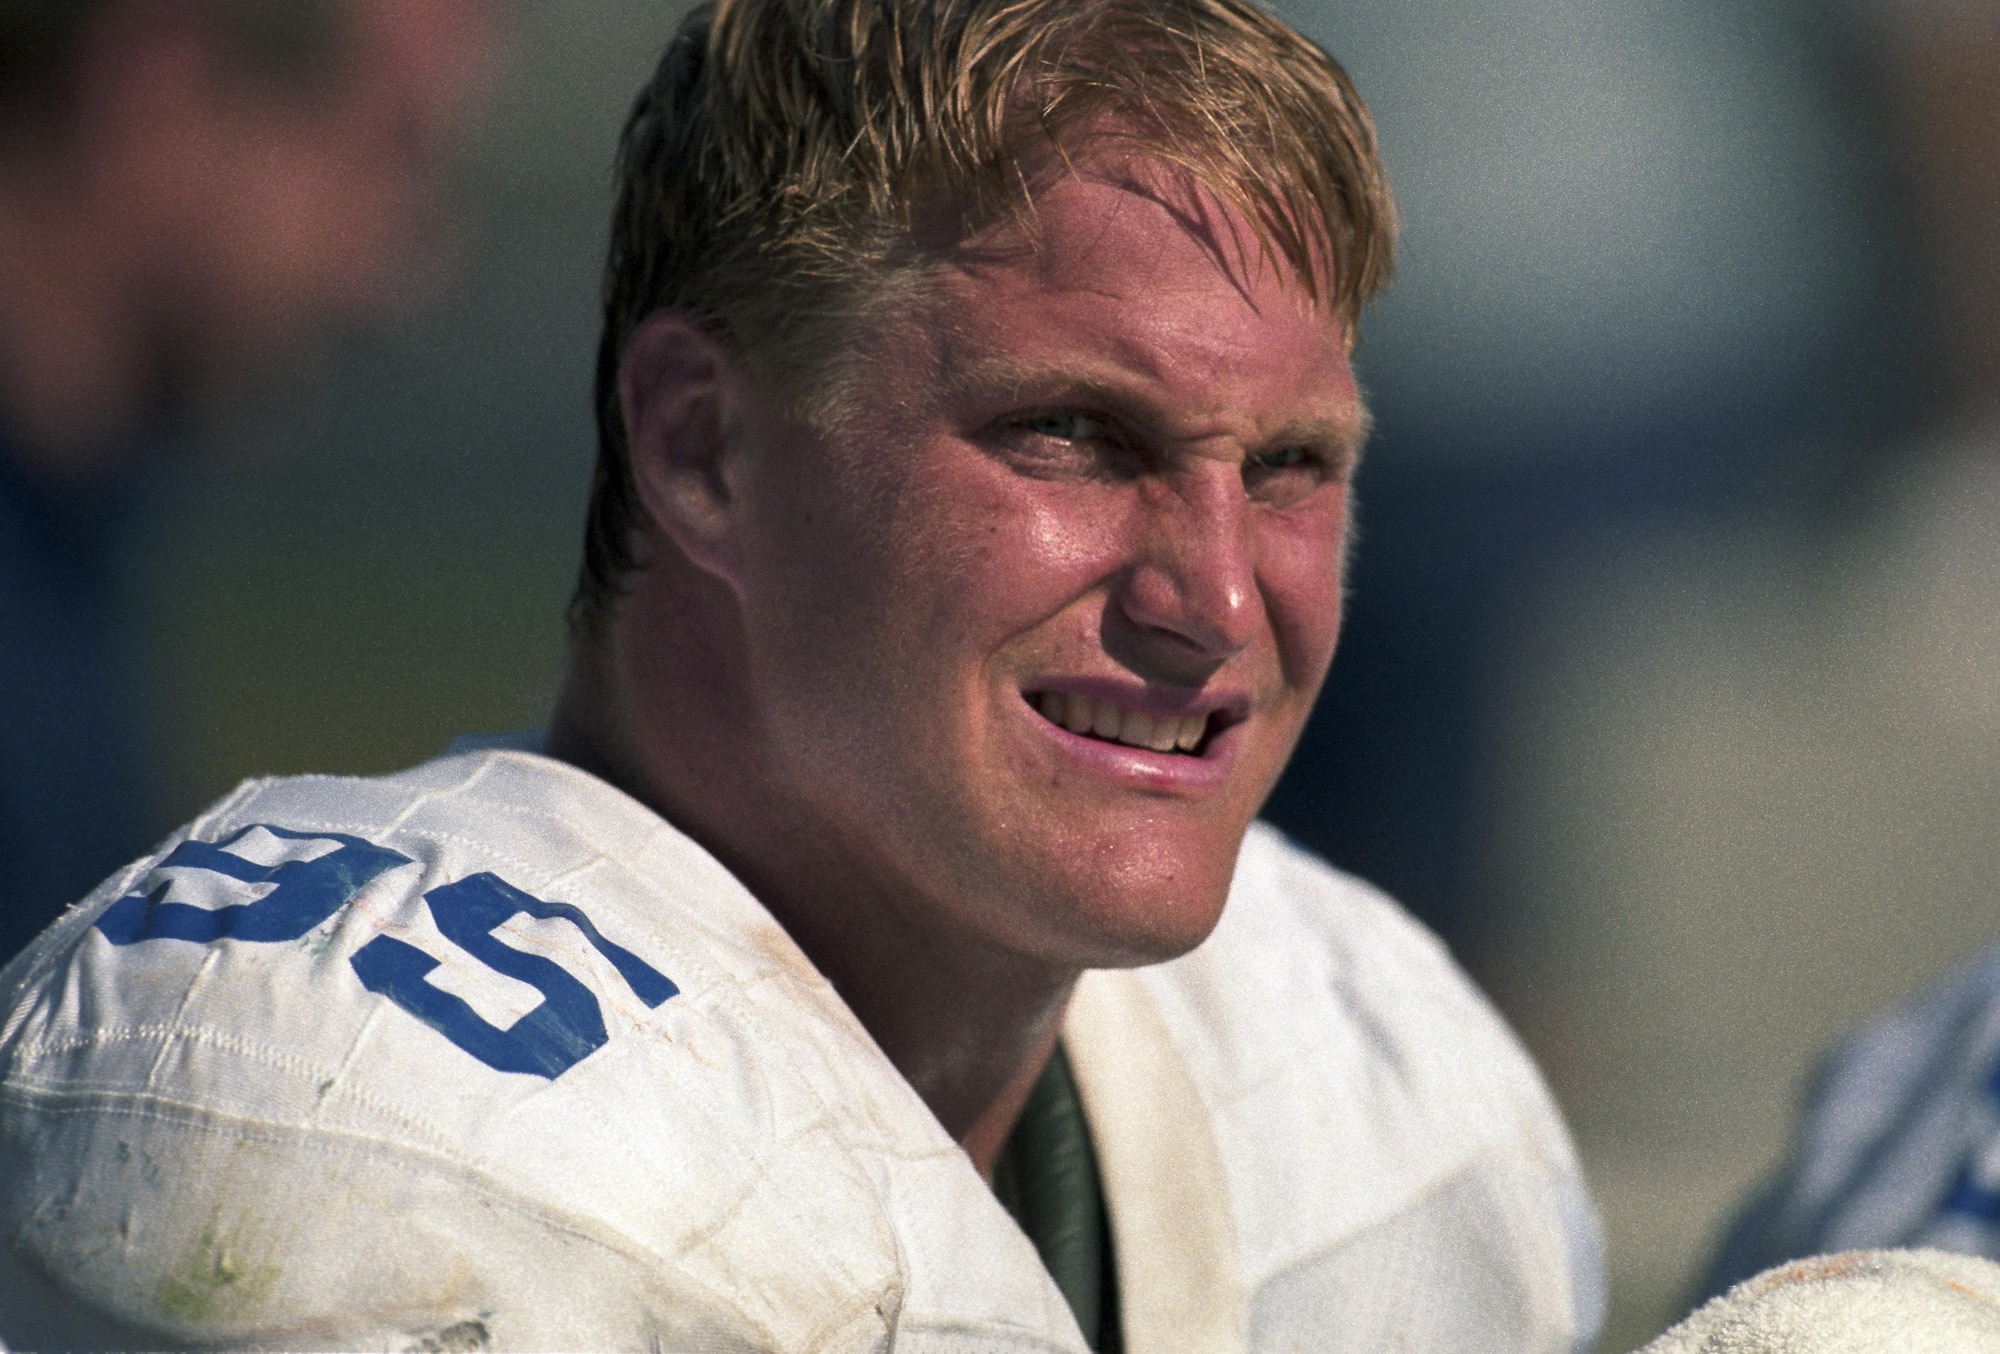 Chad Hennings played for the Dallas Cowboys for nine seasons. During that time, he was part of three Super Bowl winning teams and played in 119 games, recording 27.5 sacks. Before his NFL career, Hennings graduated from the U.S. Air Force Academy in 1988 and went into pilot training. He would eventually fly an A-10 Thunderbolt II in 45 combat sorties over northern Iraq during two deployments in 1991 and early 1992. (Courtesy photo/Dallas Cowboys)